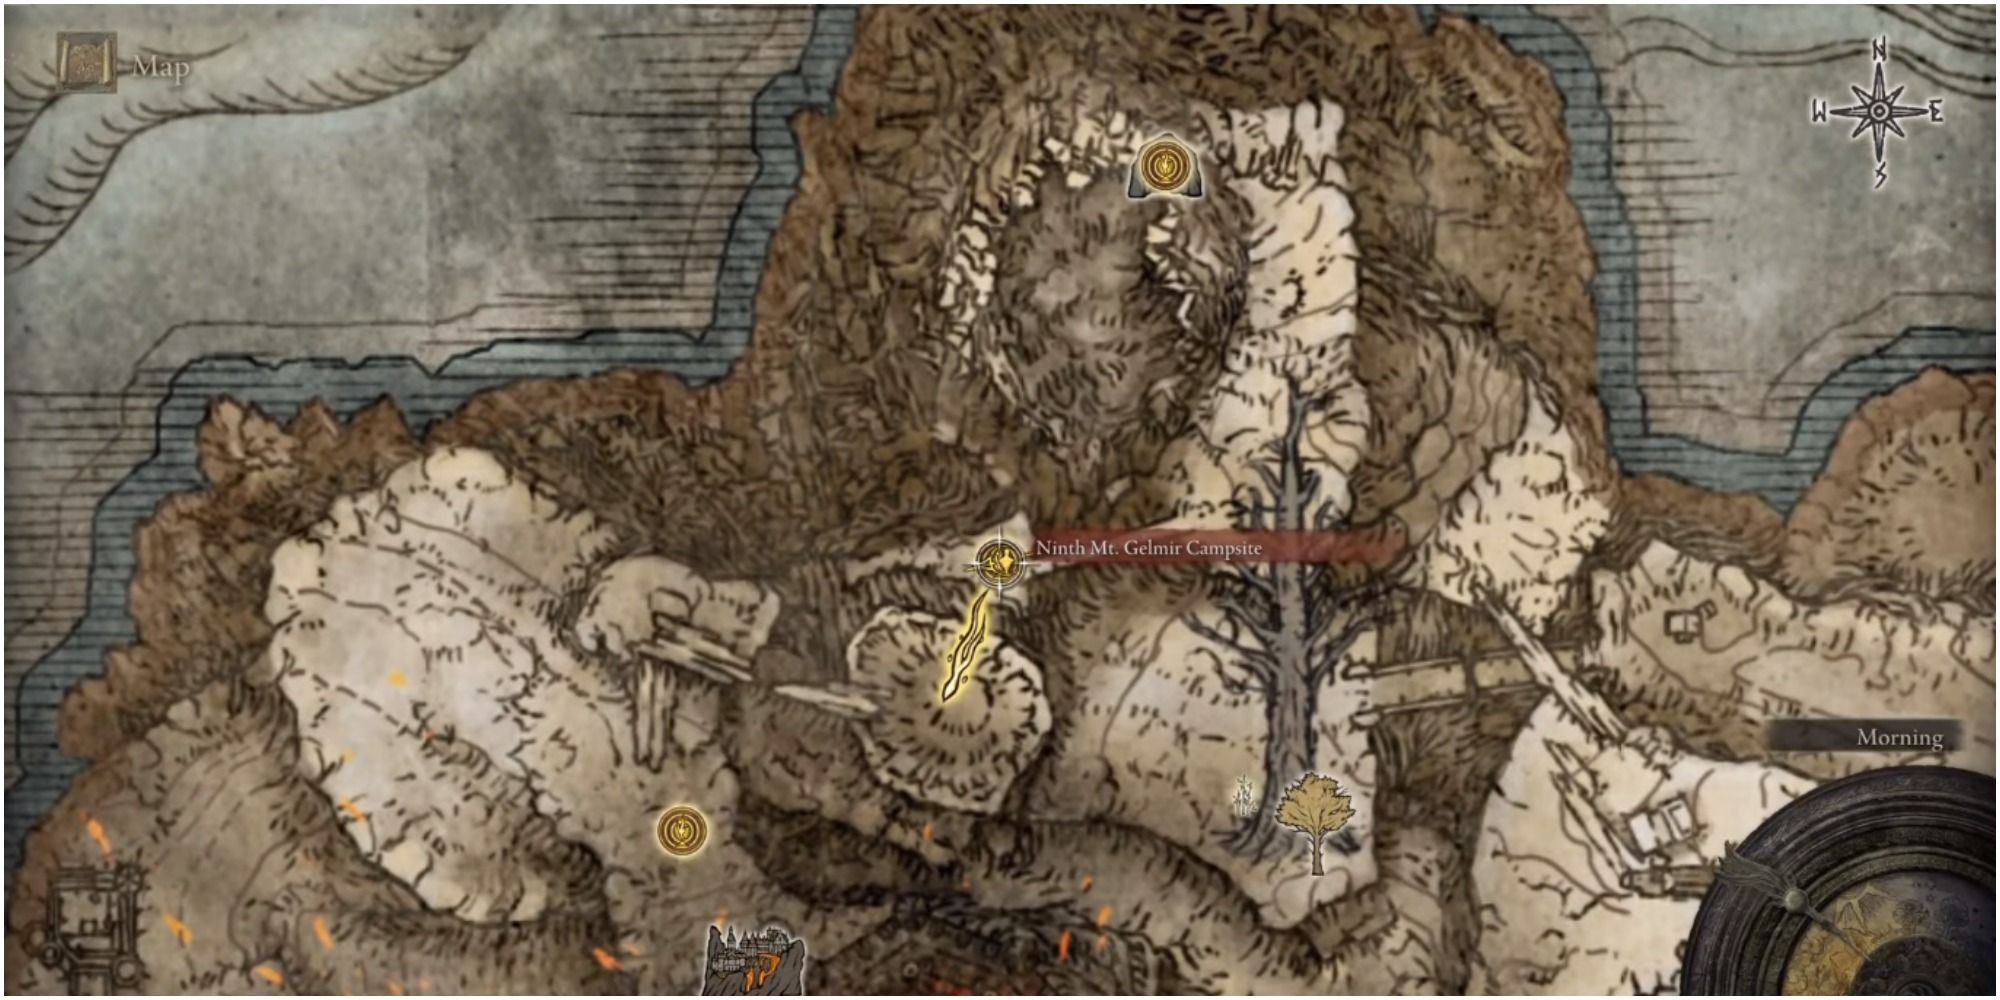 The map showing the location of the boss.